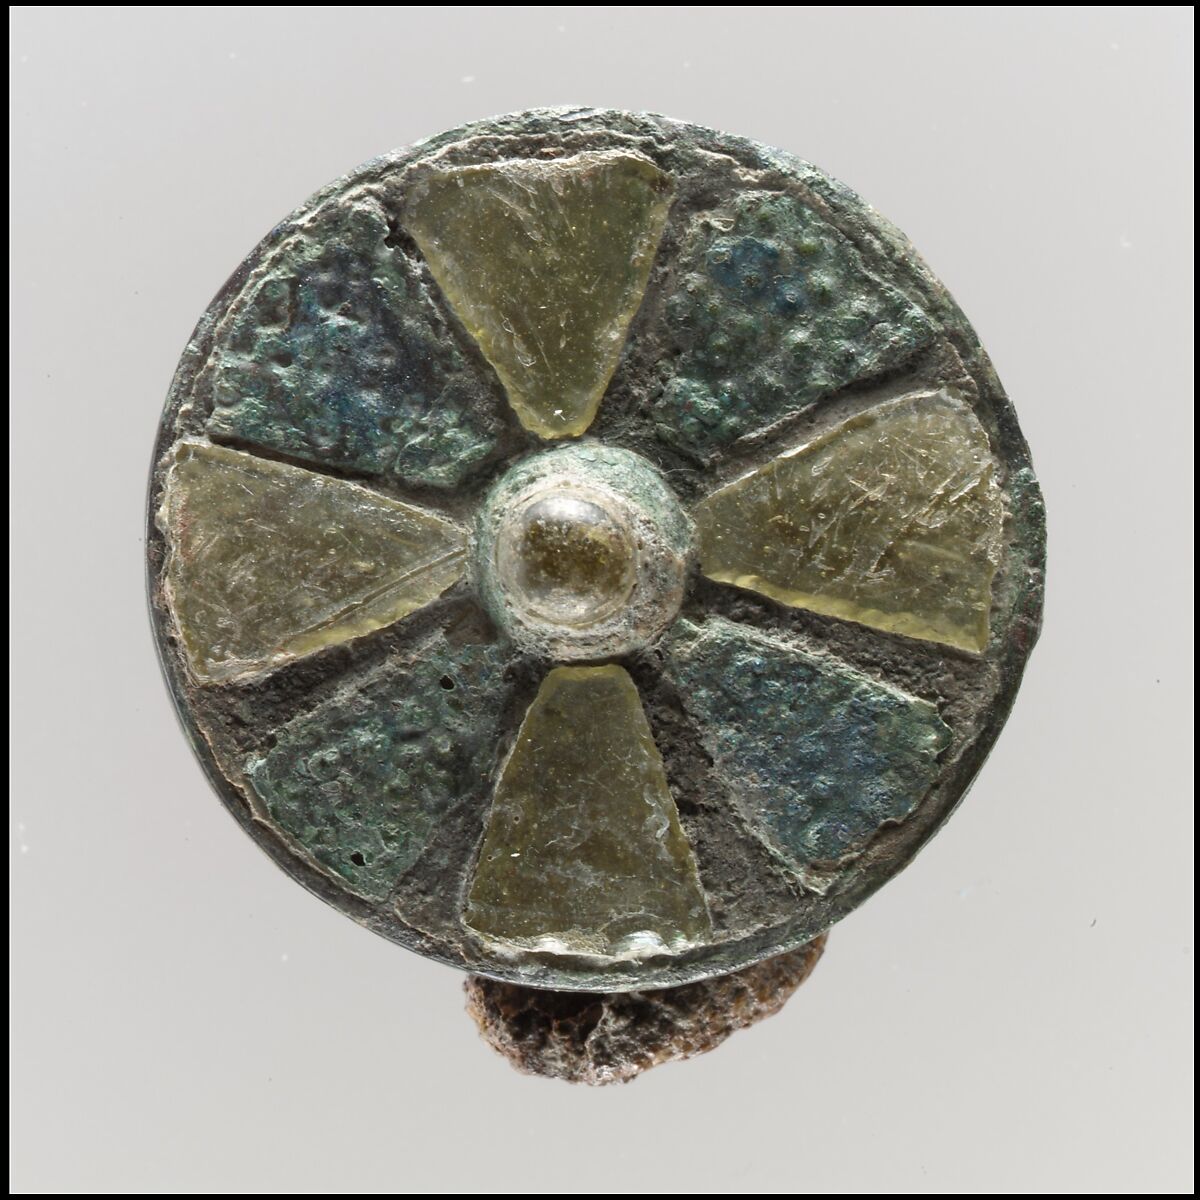 Disk Brooch, Copper alloy cloisons, side and back; glass and patterned copper alloy, Frankish 